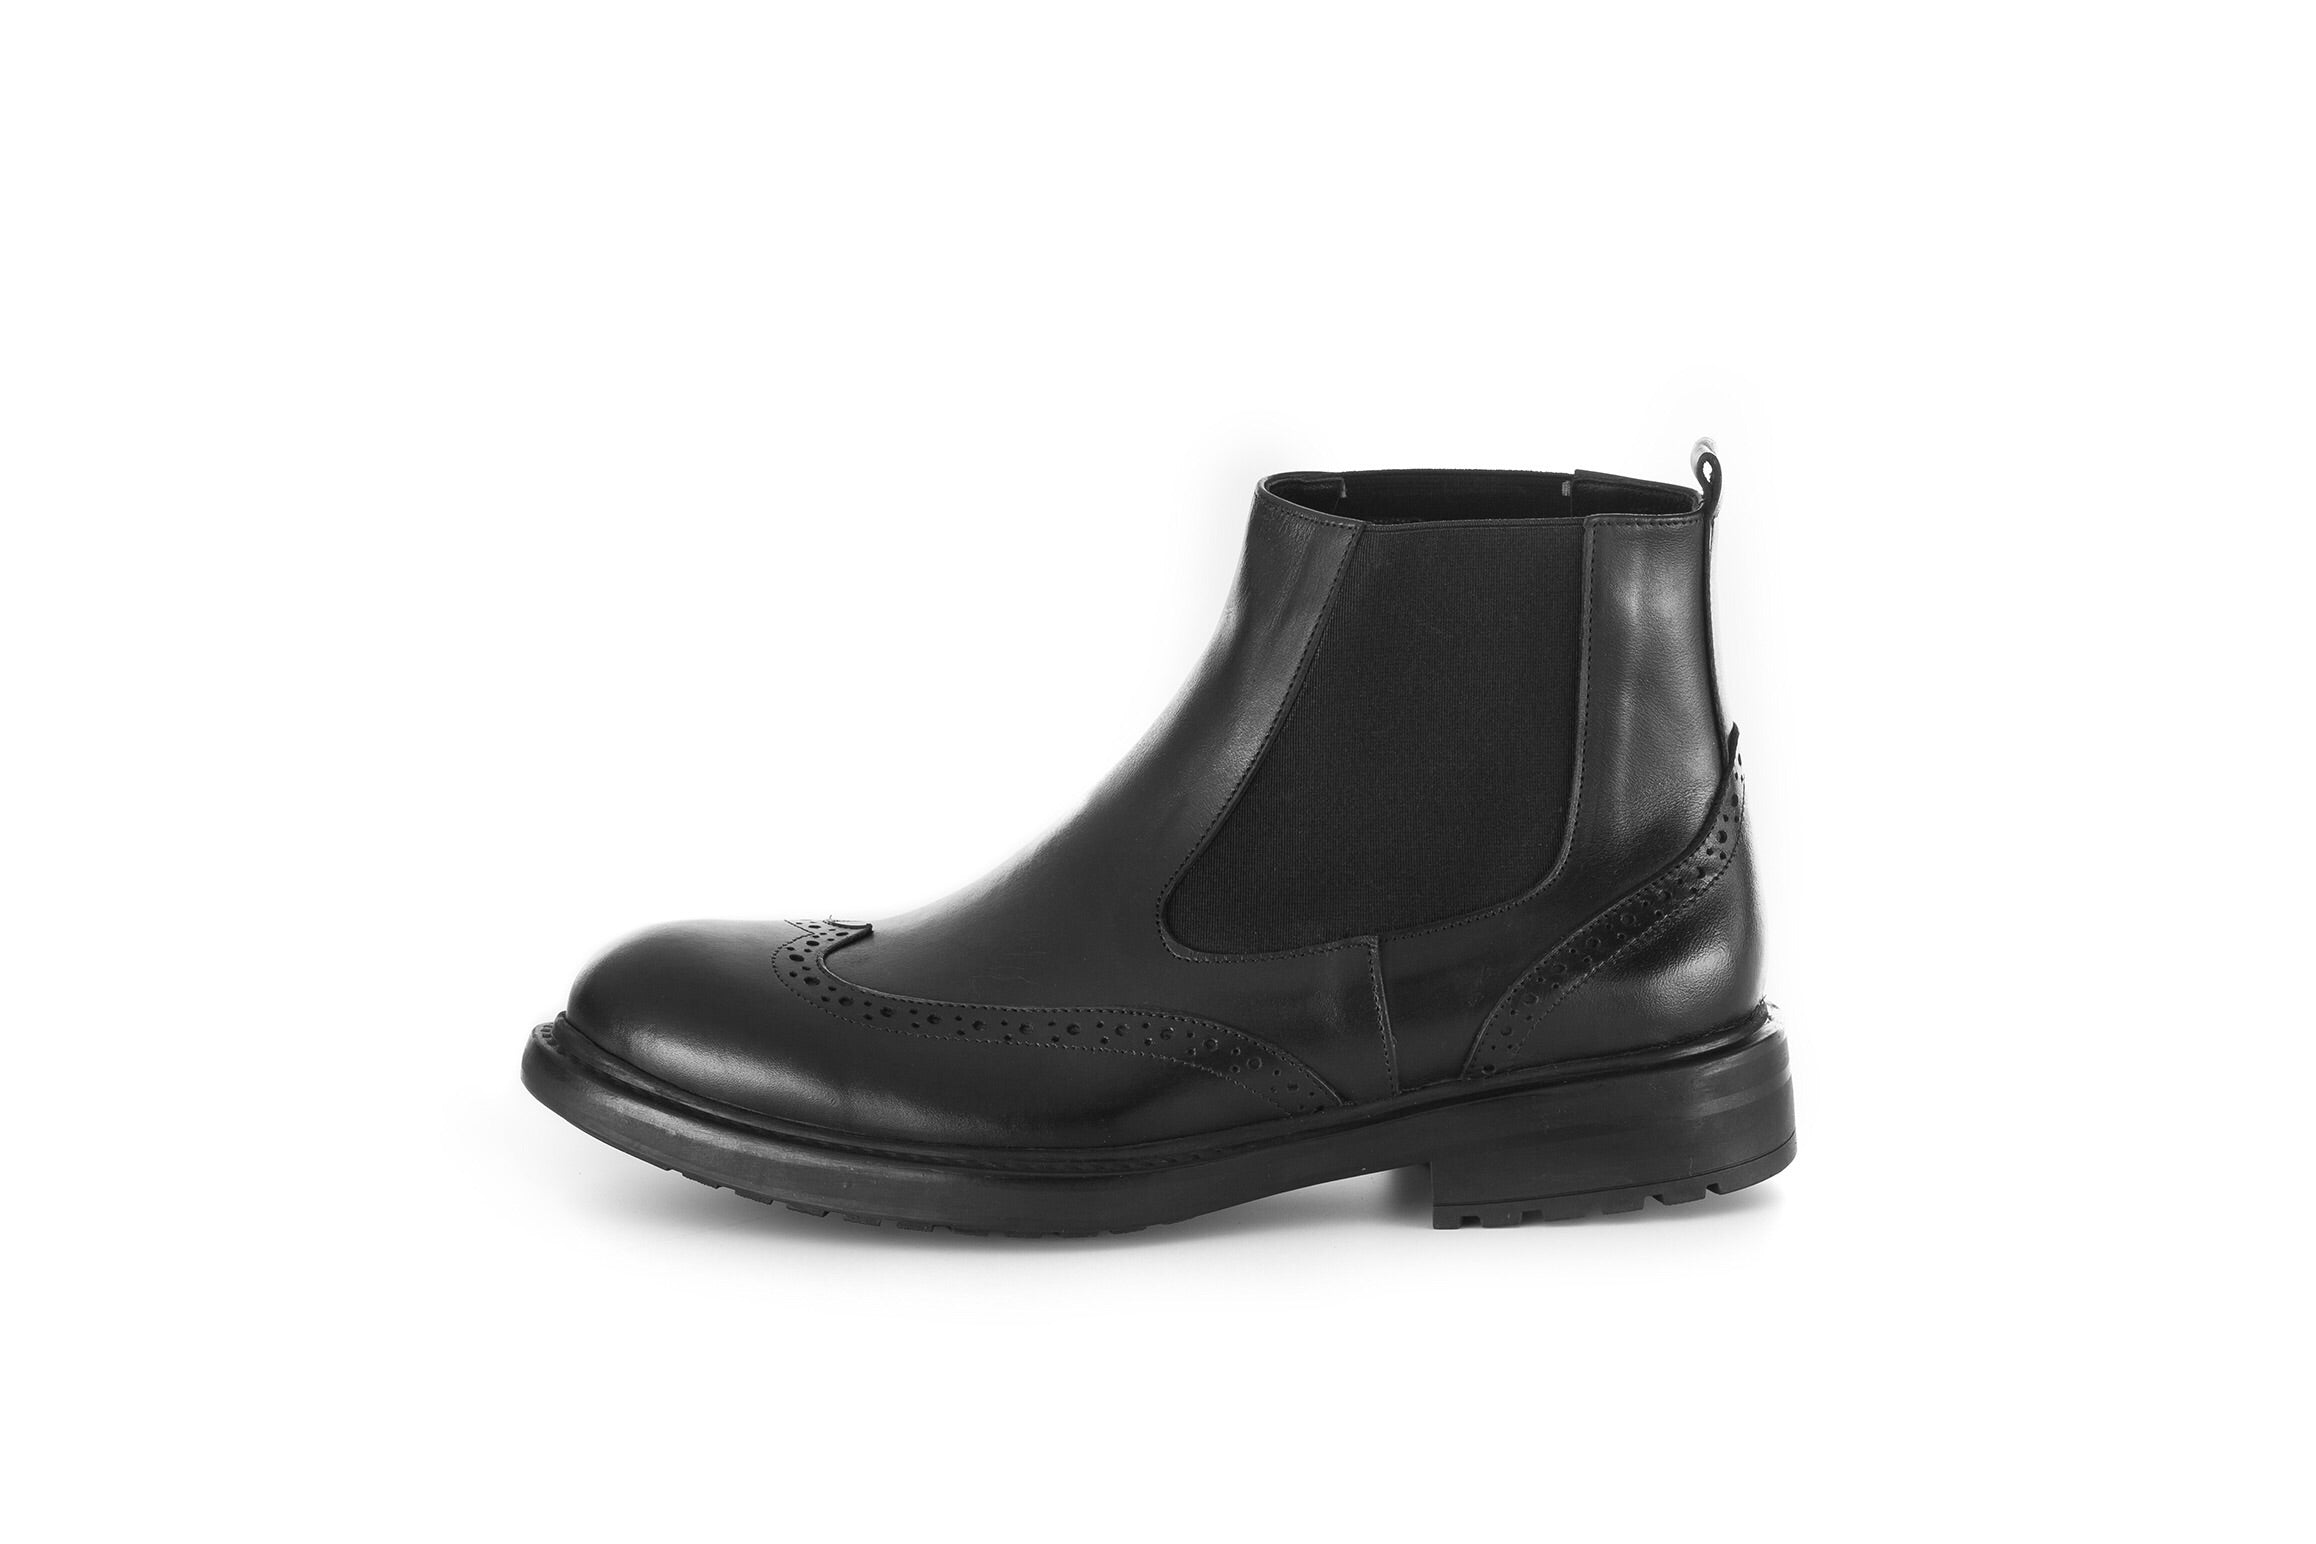 English Boots - Leather